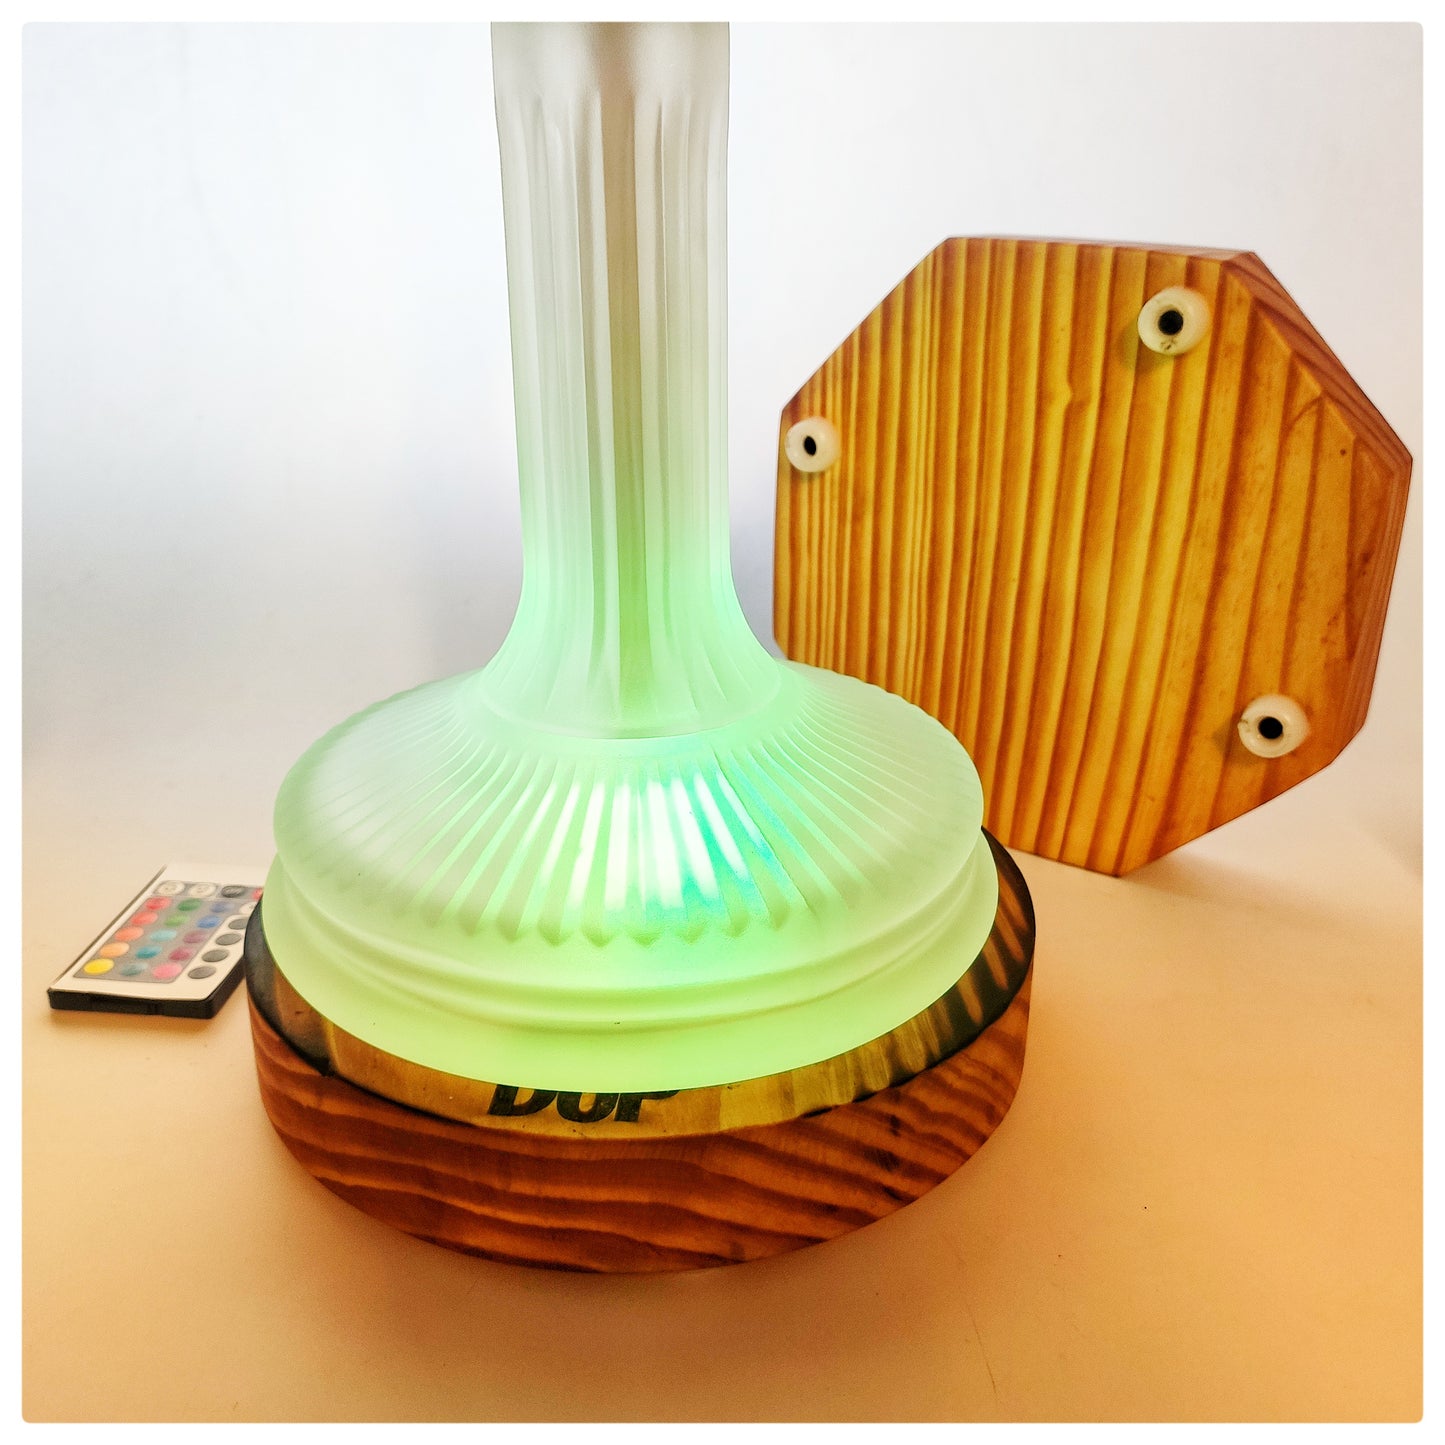 Hookah Wooden Base Stand with LED Light